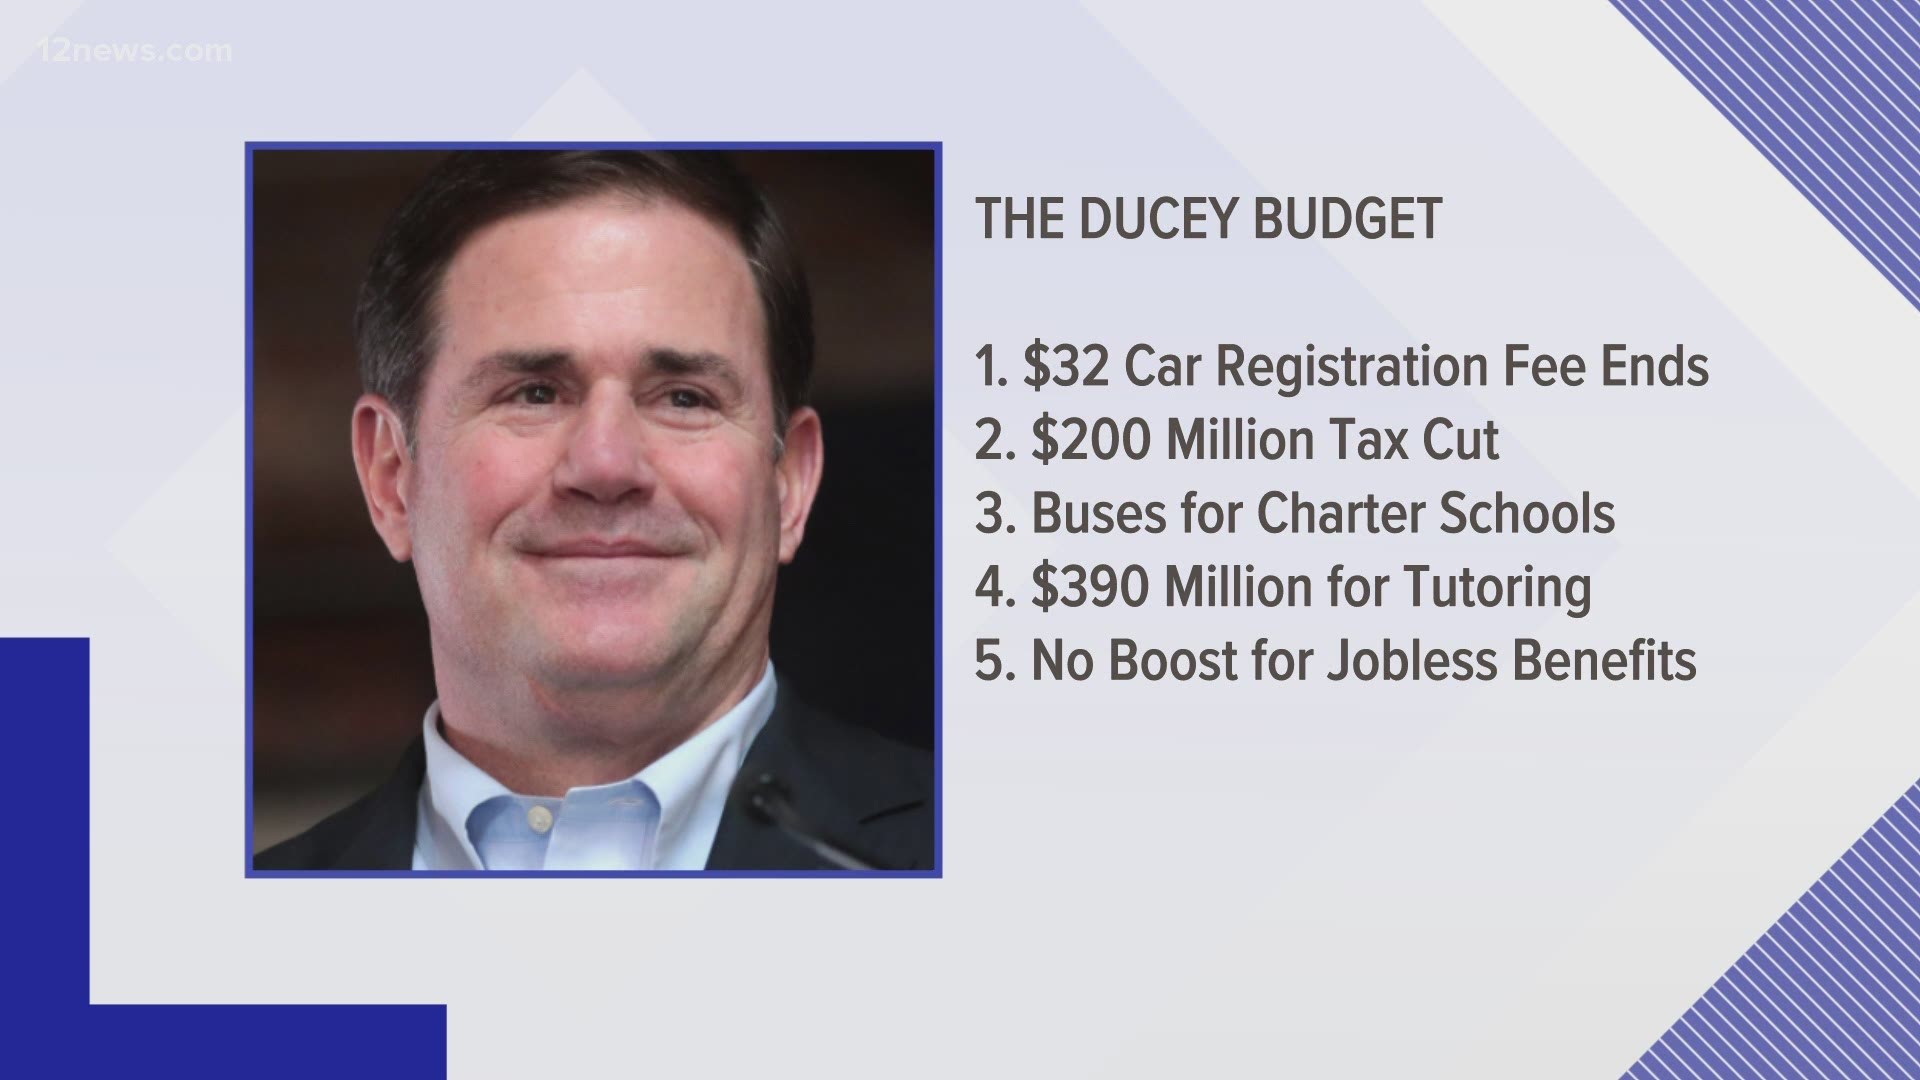 Gov. Doug Ducey is proposing the largest tax cut in his seven years in office for the coming budget year. That and four more things he plans to spend your money on.